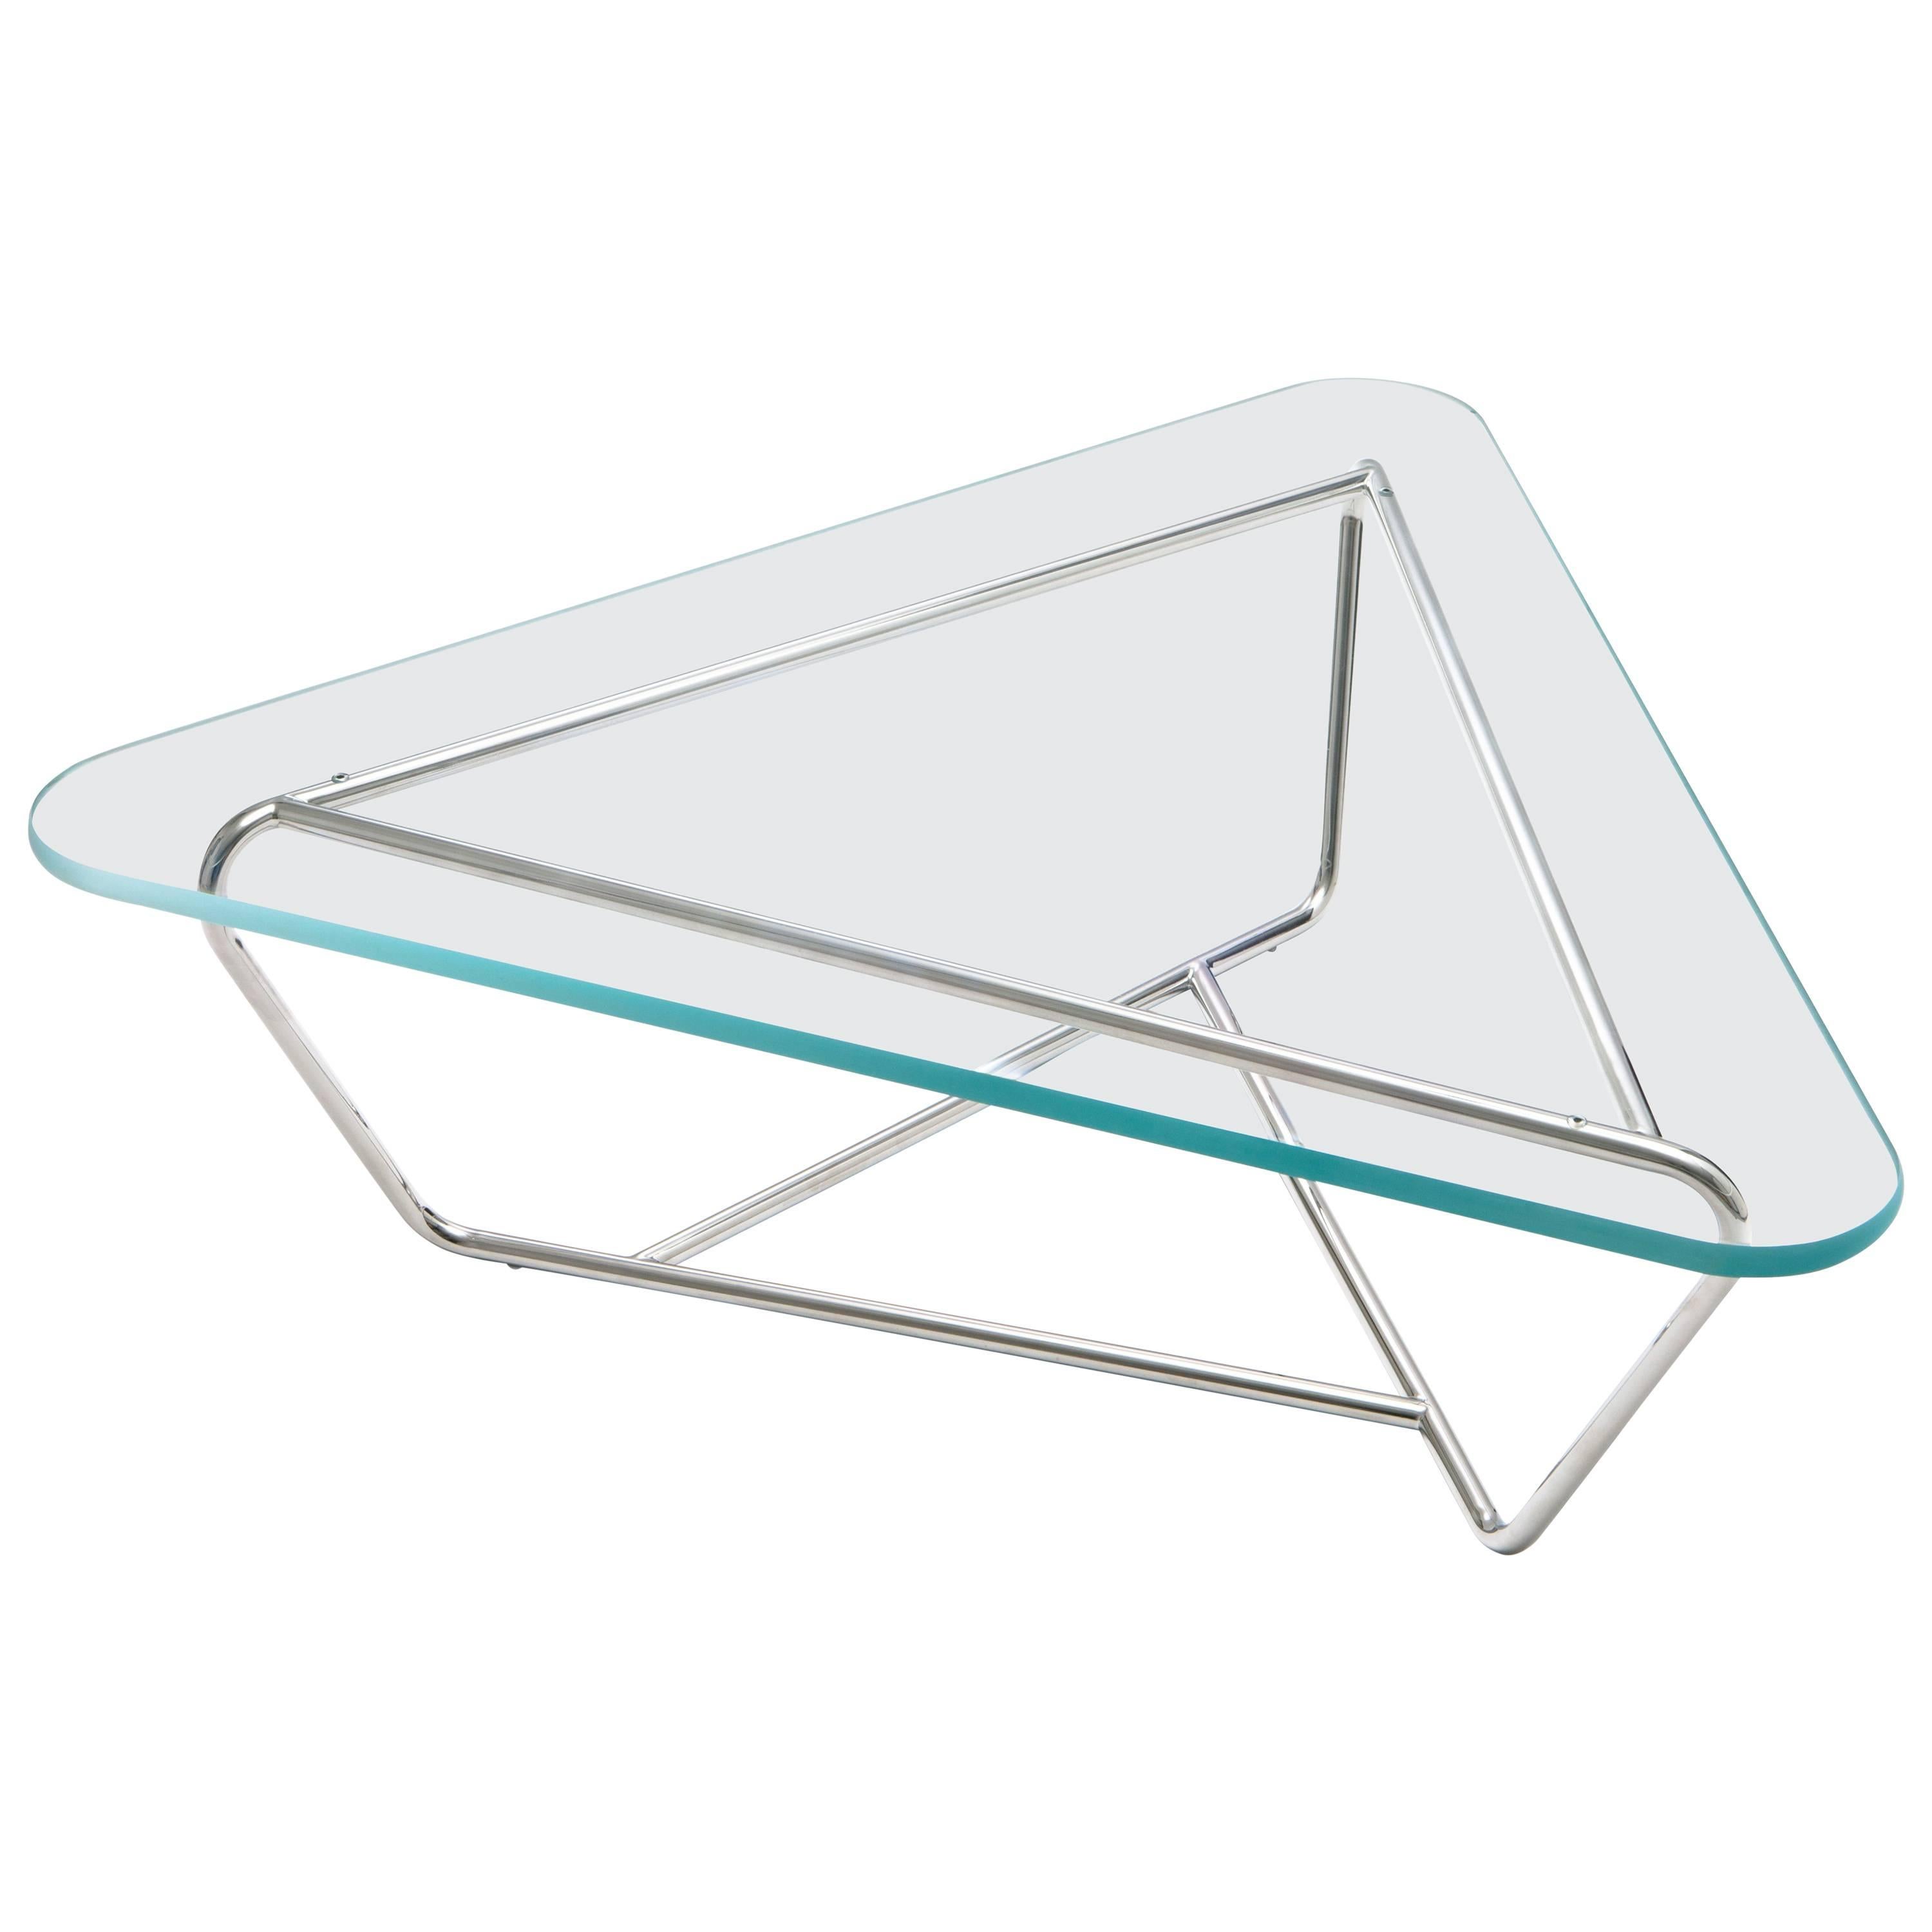 Prism, Glass & Stainless Steel Contemporary Coffee Table by Made in Ratio